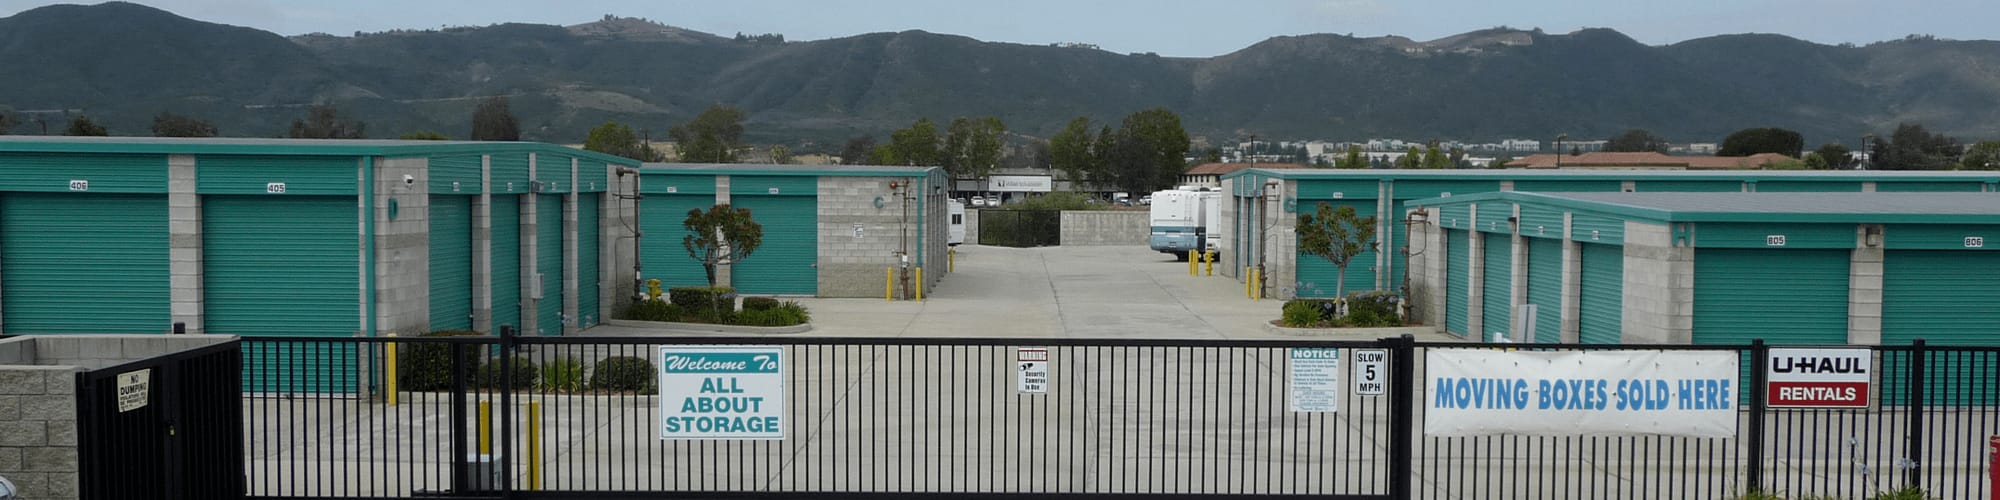 Gated facility at All About Storage Temecula in Temecula, California